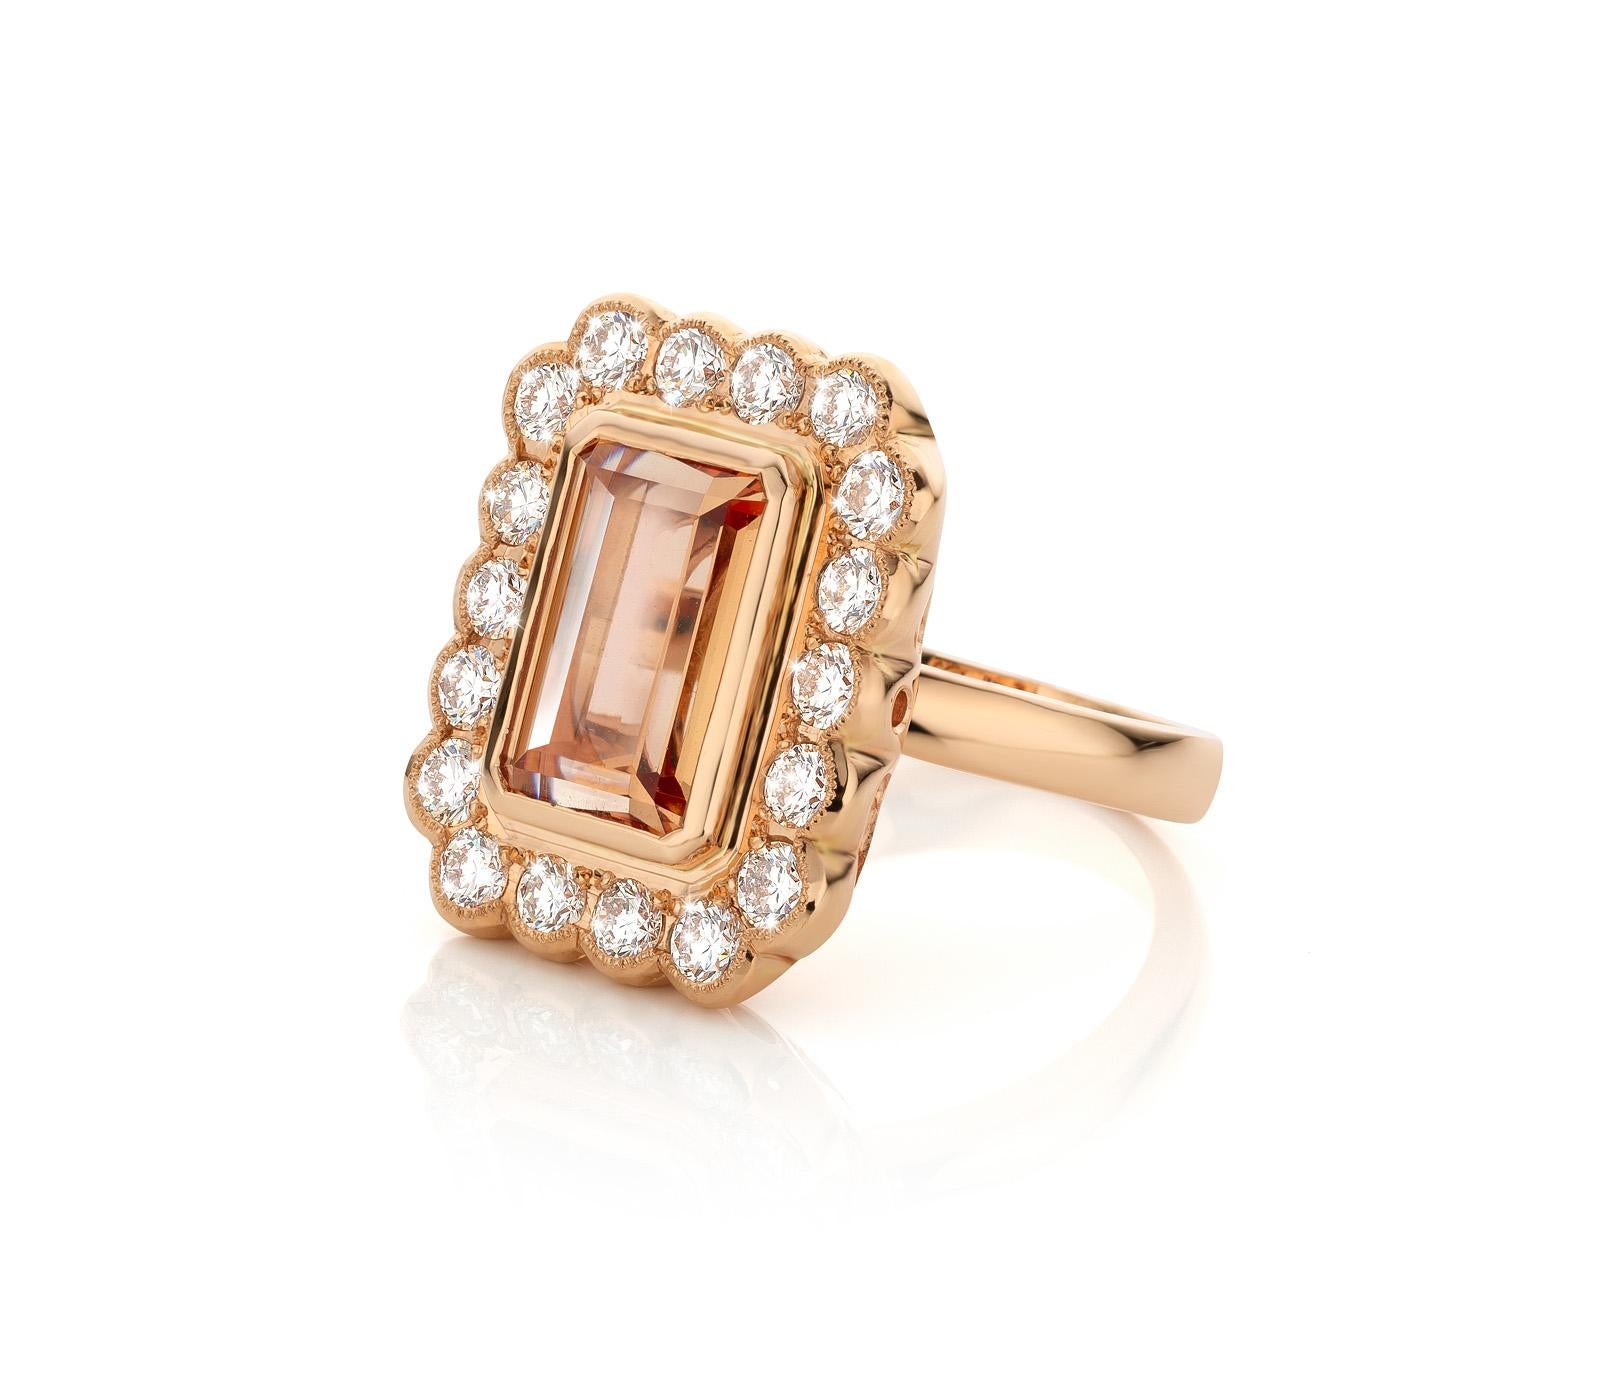 One of a kind “Mary-Lou” ring in 18 Karat rose gold 11,3g set with 1 natural, eye clean, vivid Imperial topaz in emerald cut 4,75 Carat and the finest diamonds 1,51 Carat LC/D quality in brilliant cut.

Because every Imperial topaz has his own color